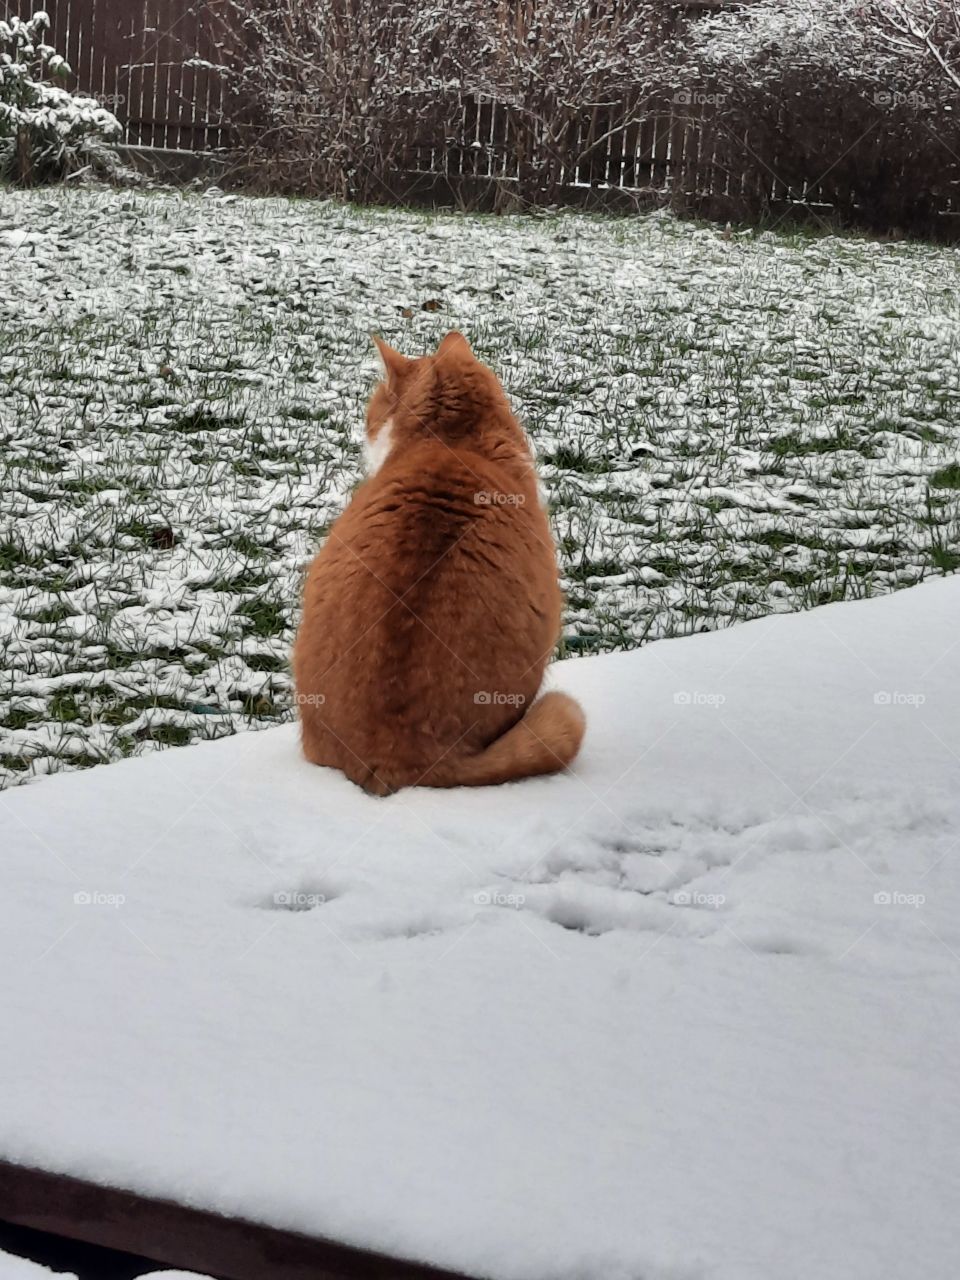 winter nature  - ginger cat with winter fur observing snow covered garden